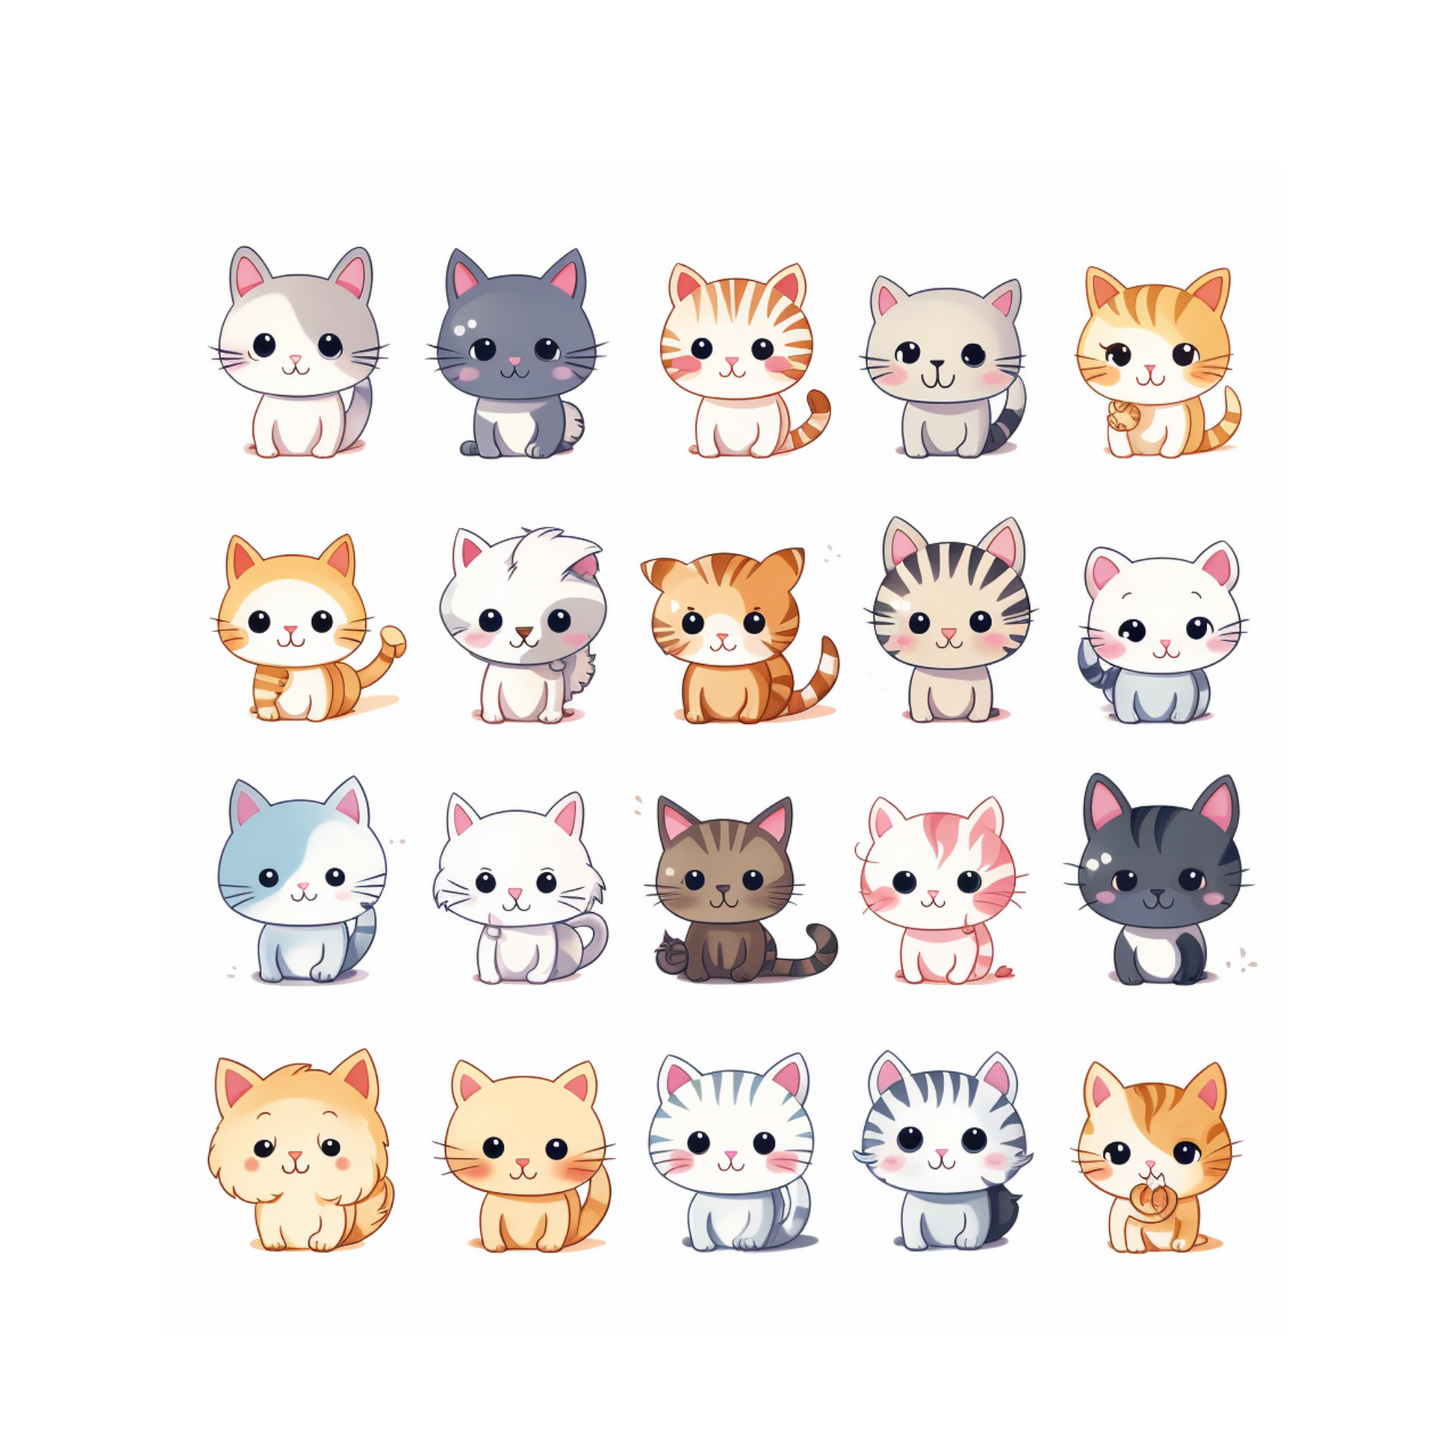 Cute Anime Cat Tattoo Art #2 | High resolution PNG file | Instant download